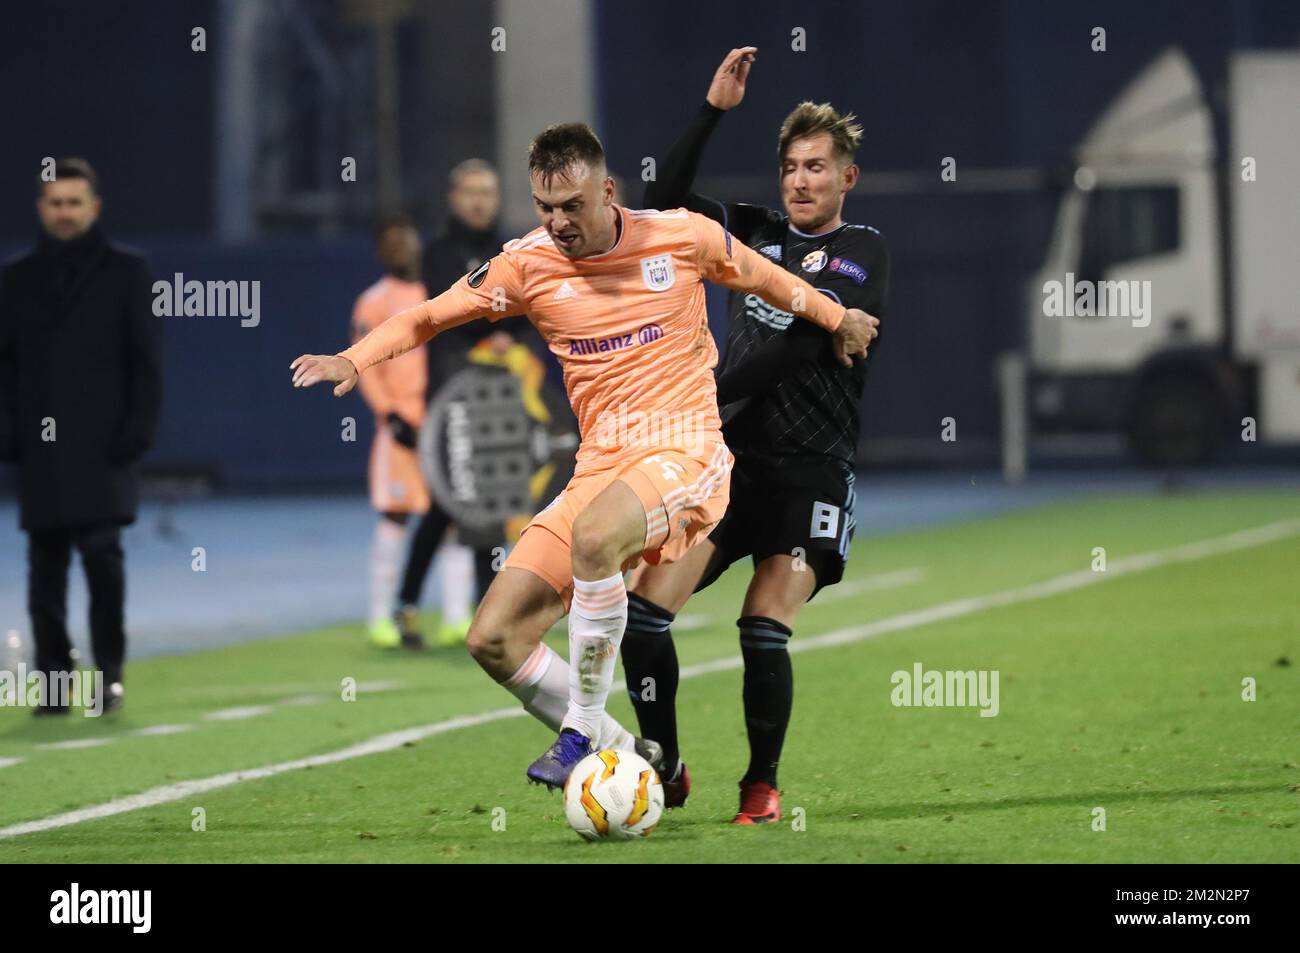 Anderlecht's Antonio Ante Milic and Dinamo Zagreb's midfielder Izet Hajrovic fight for the ball during the game between Belgian team RSCA Anderlecht and Croatian team Dinamo Zagreb, in Zagreb, Thursday 13 December 2018, their first round match on day six of the Europa League group stage. BELGA PHOTO VIRGINIE LEFOUR Stock Photo